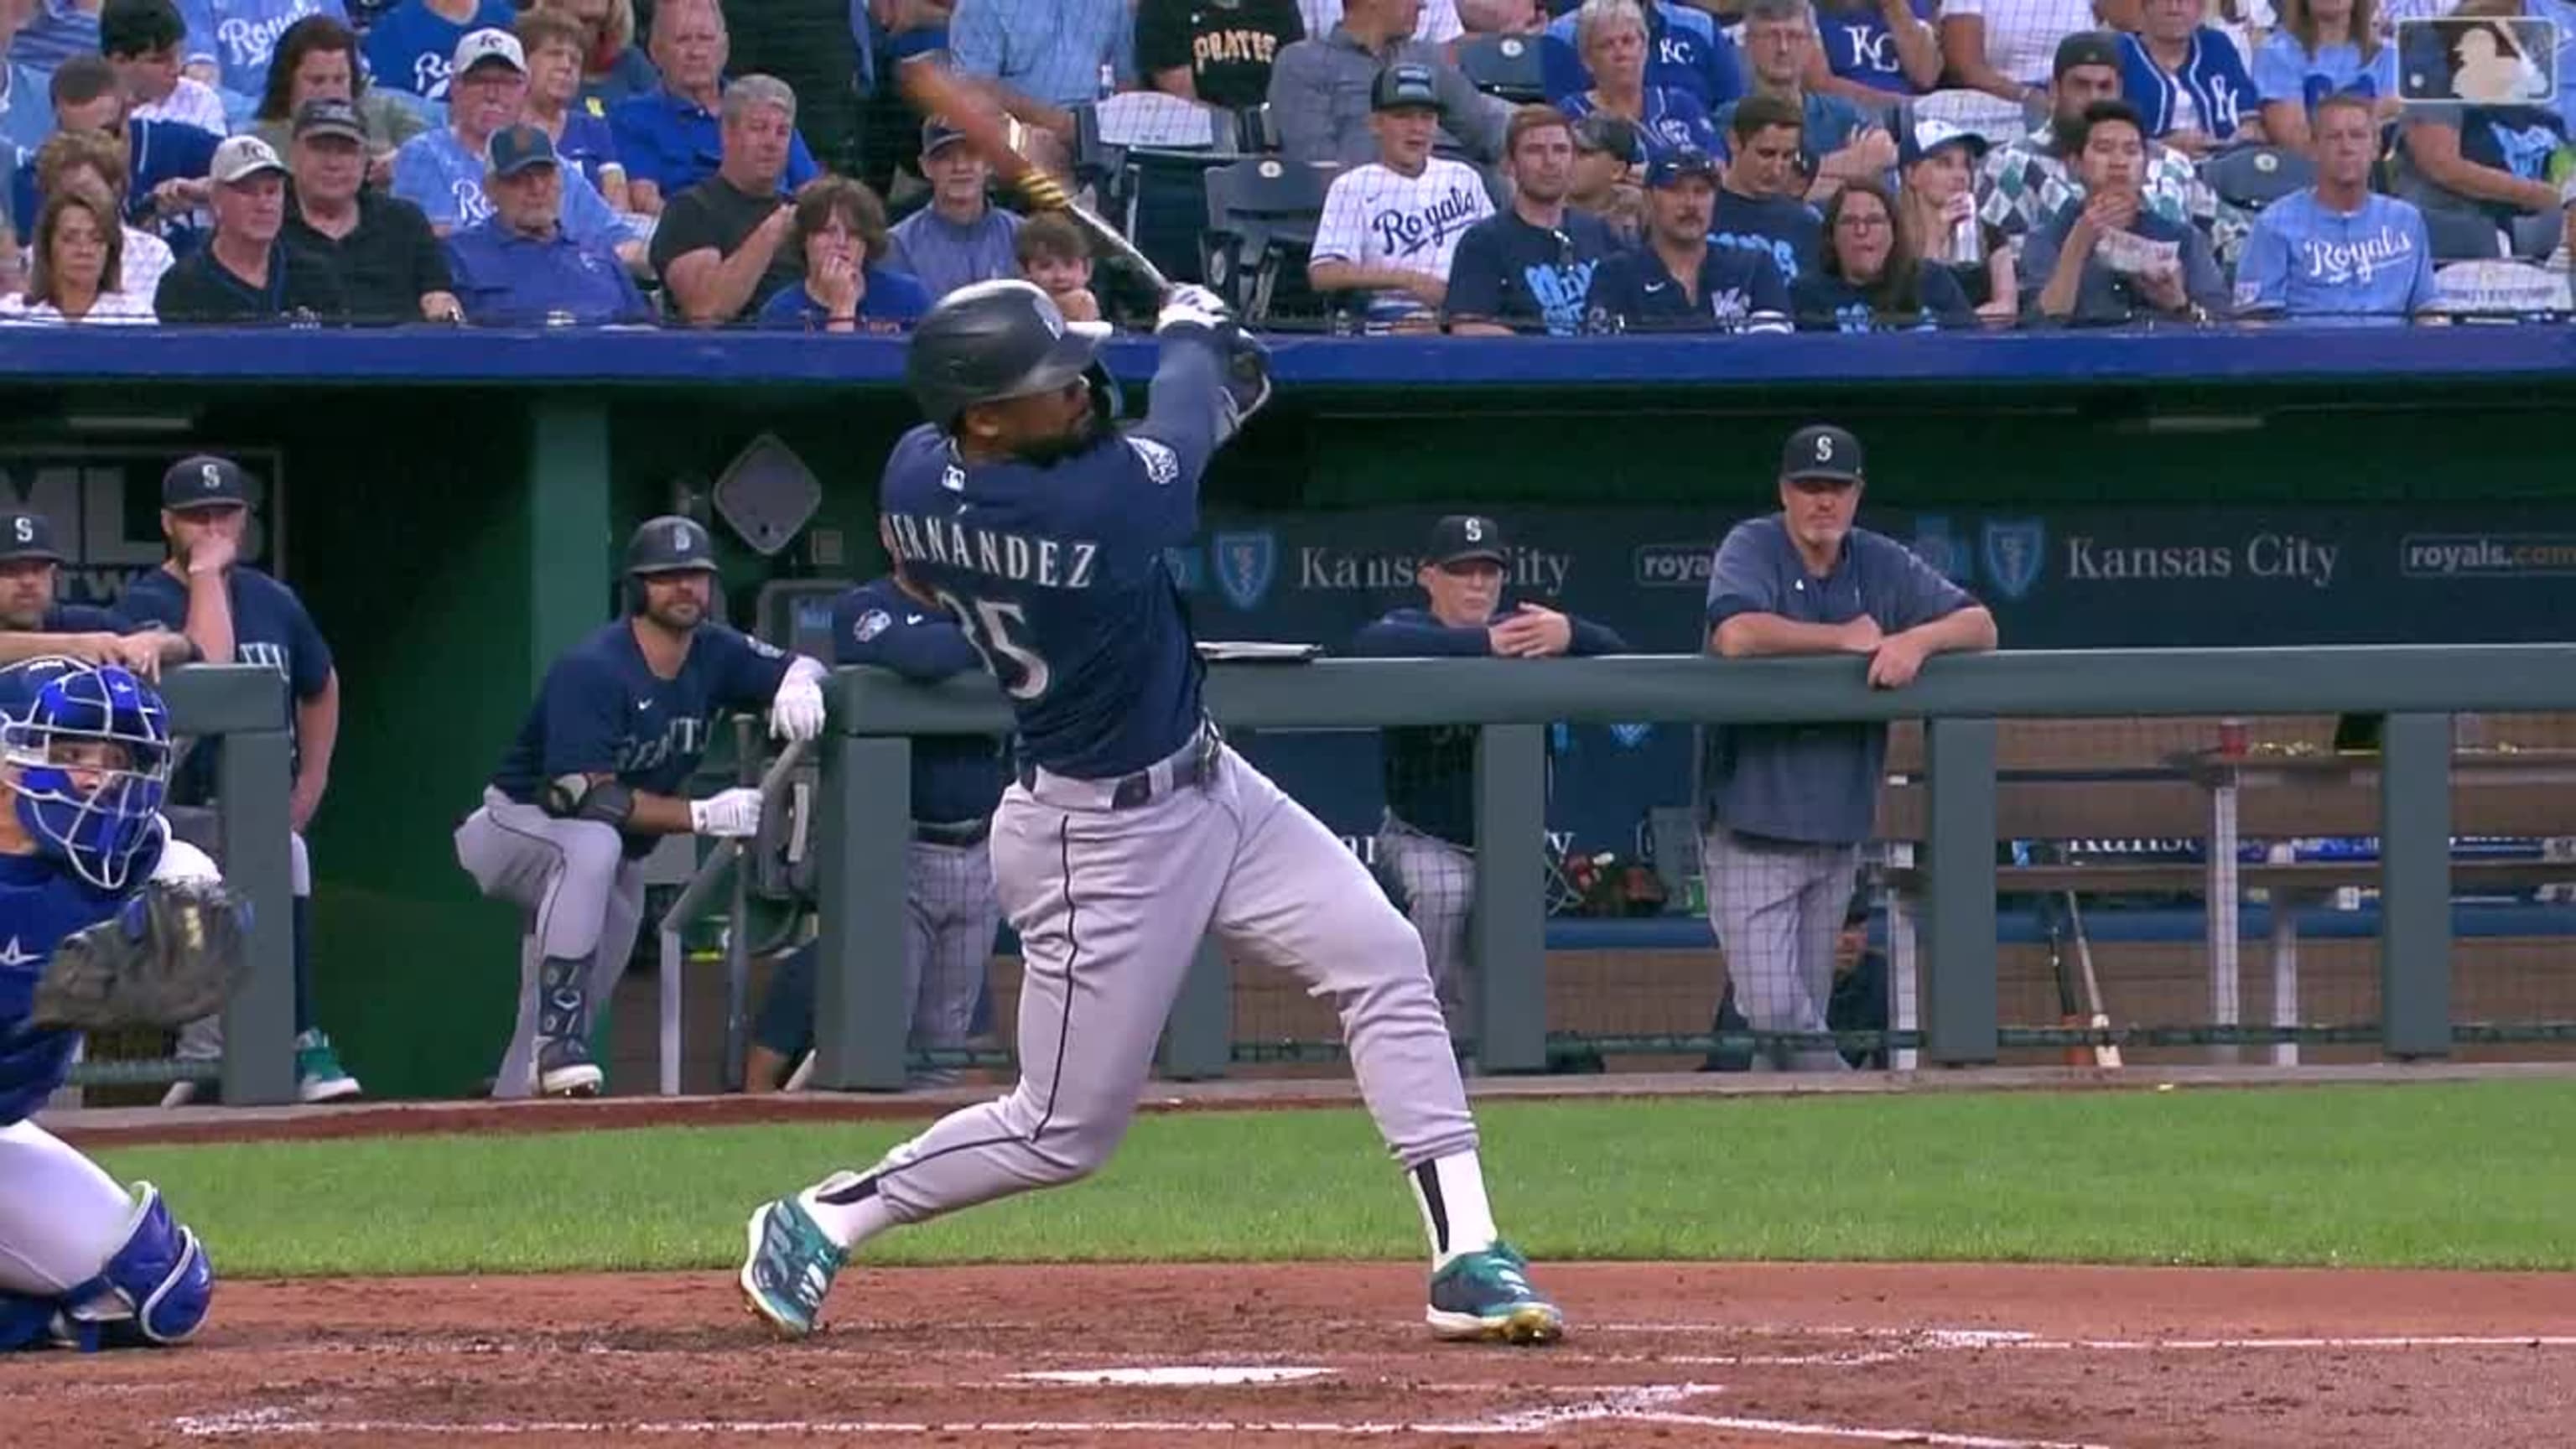 France's 10th-inning single lifts Mariners over Royals 10-8 after blown  7-run lead - ABC News